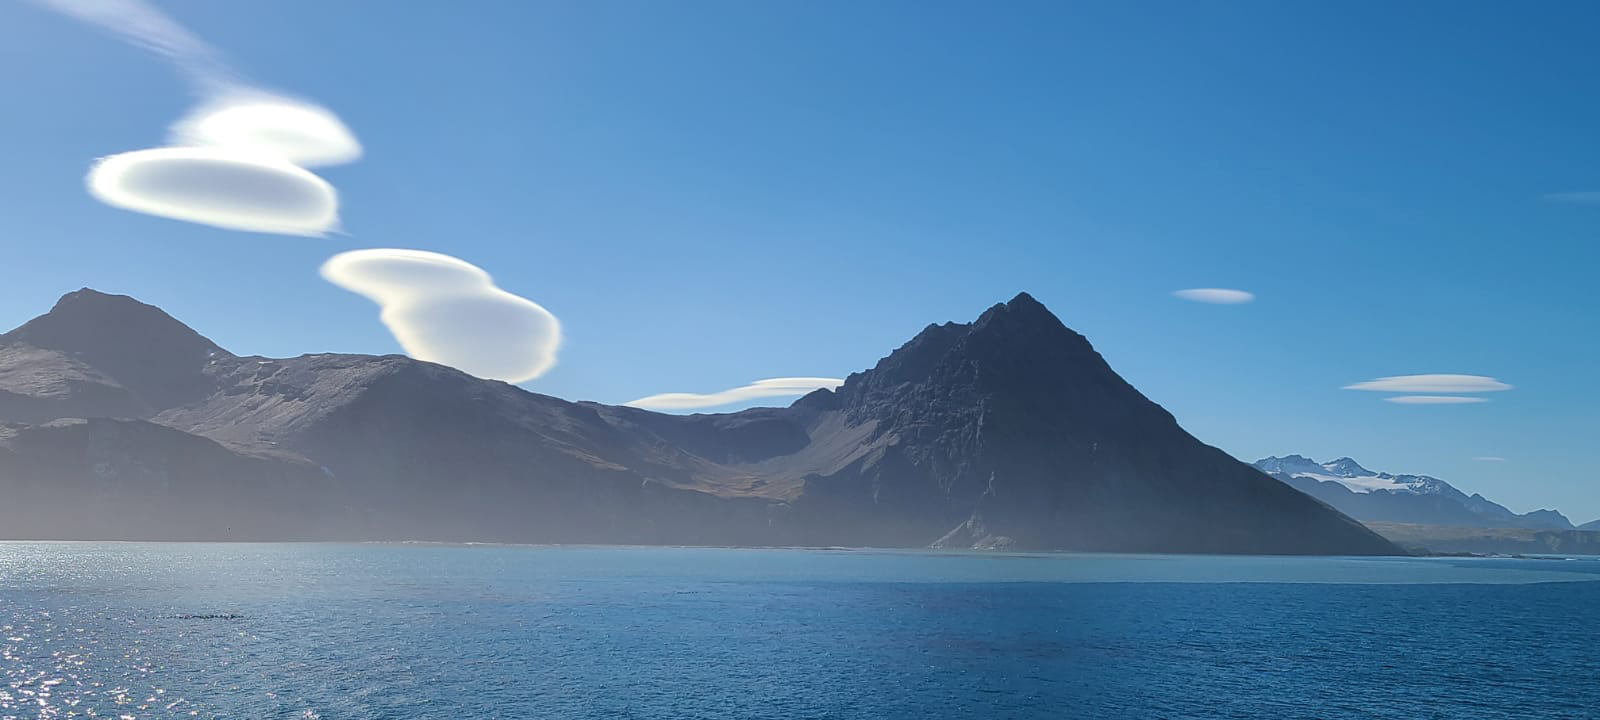 View of the coast with a mountain peak and beautiful full clouds